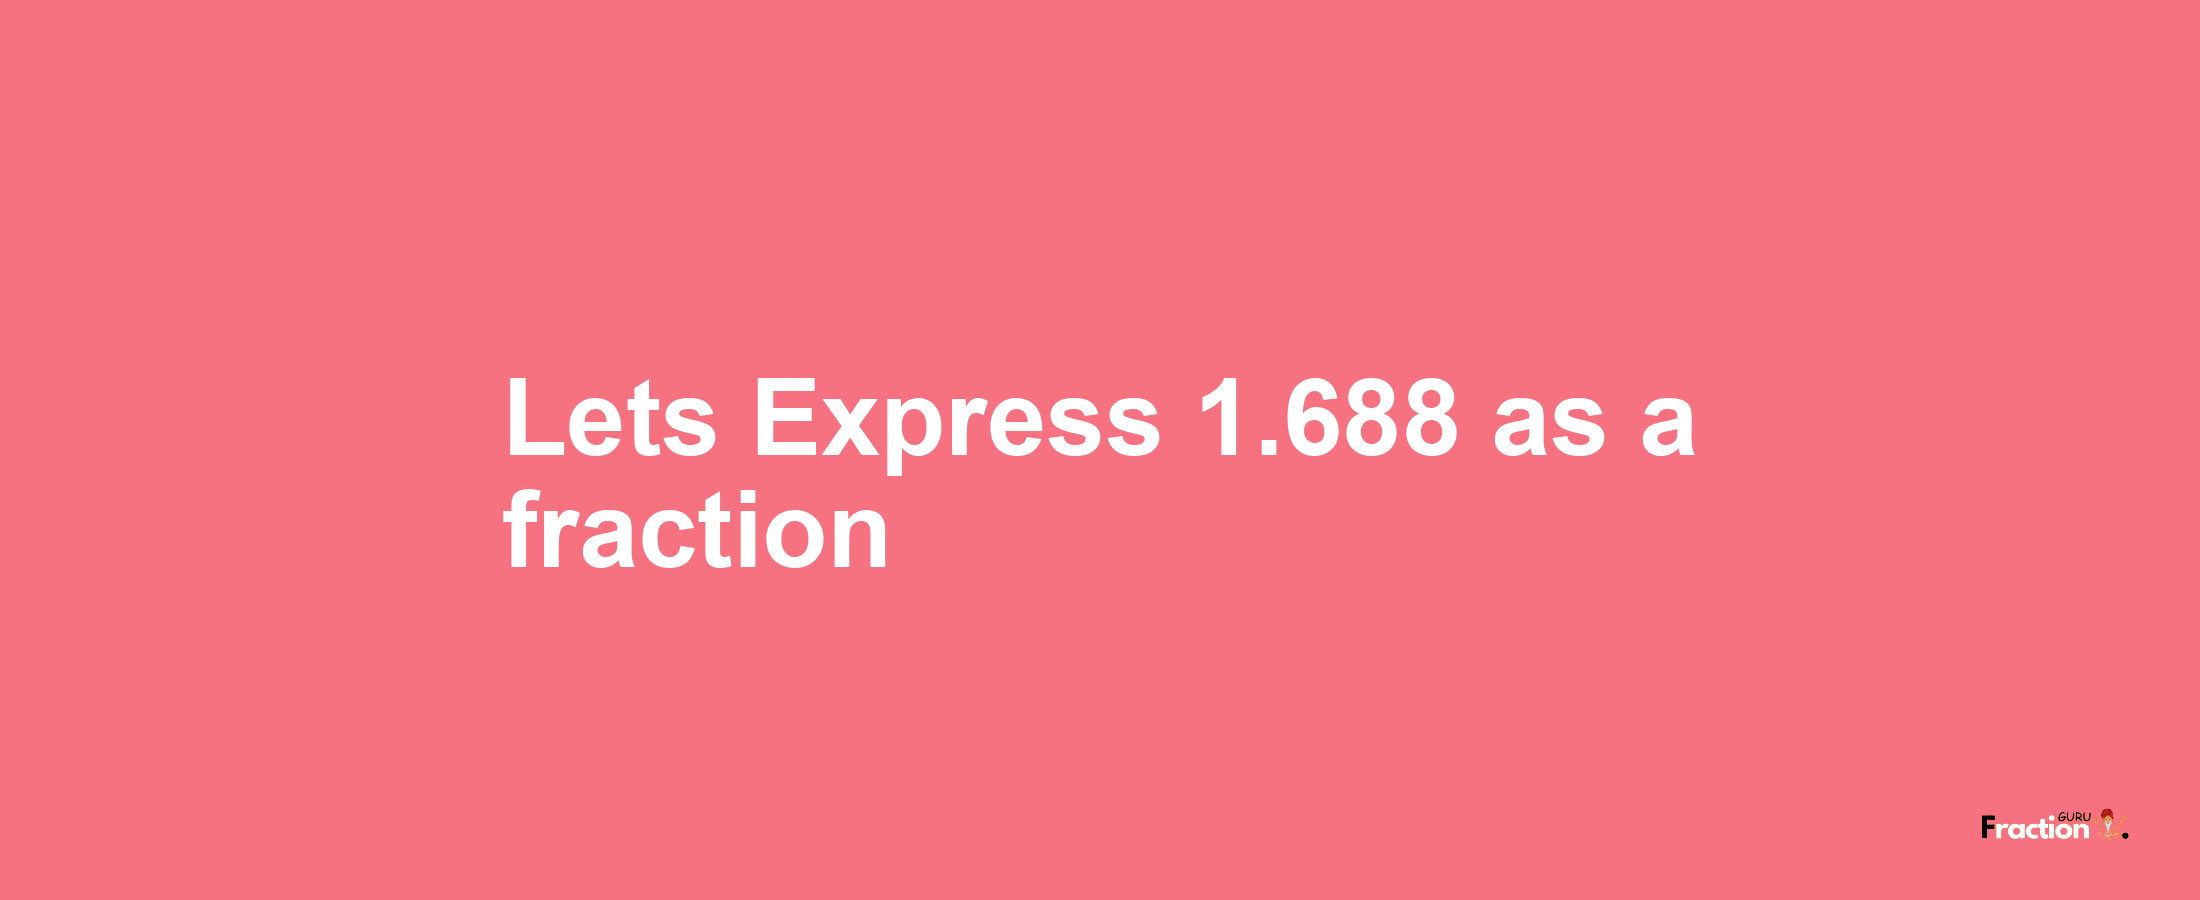 Lets Express 1.688 as afraction